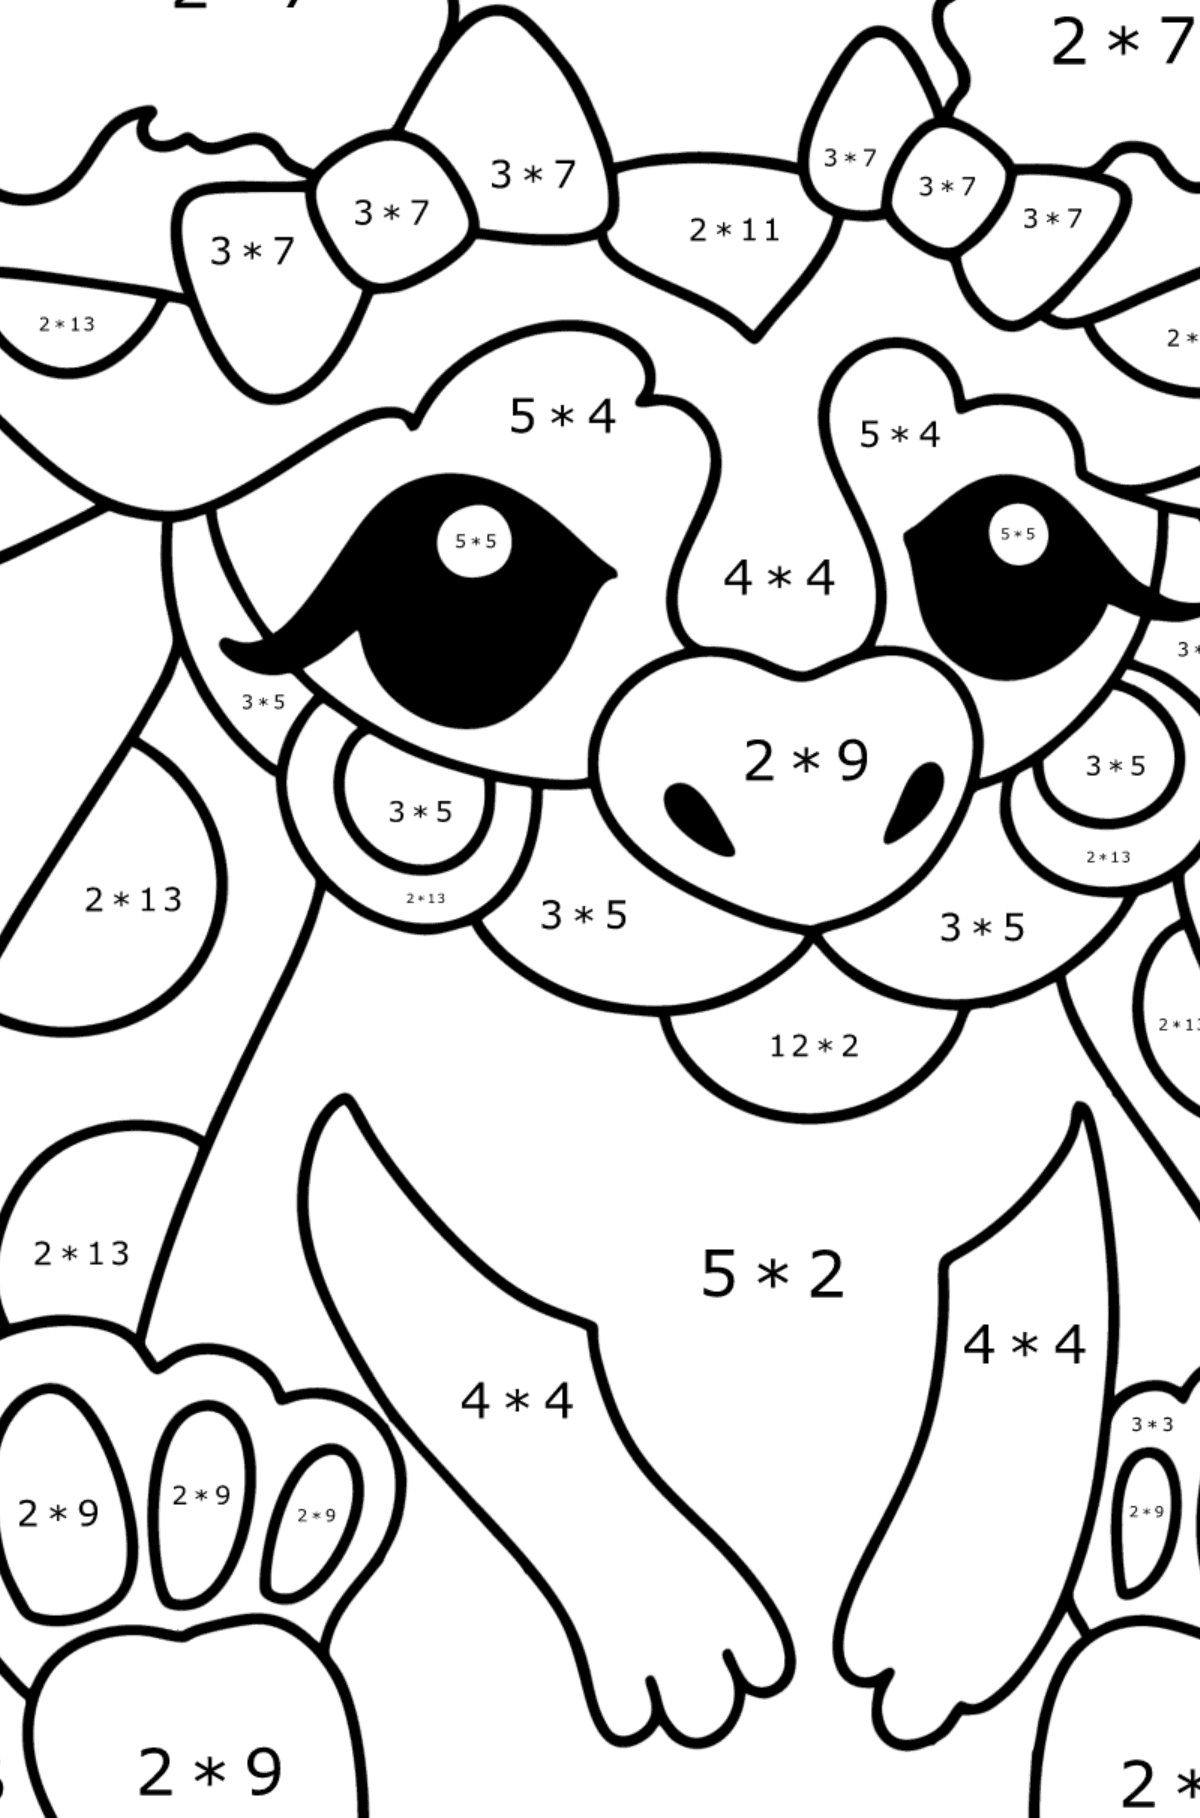 Dragon girl coloring page - Math Coloring - Multiplication for Kids